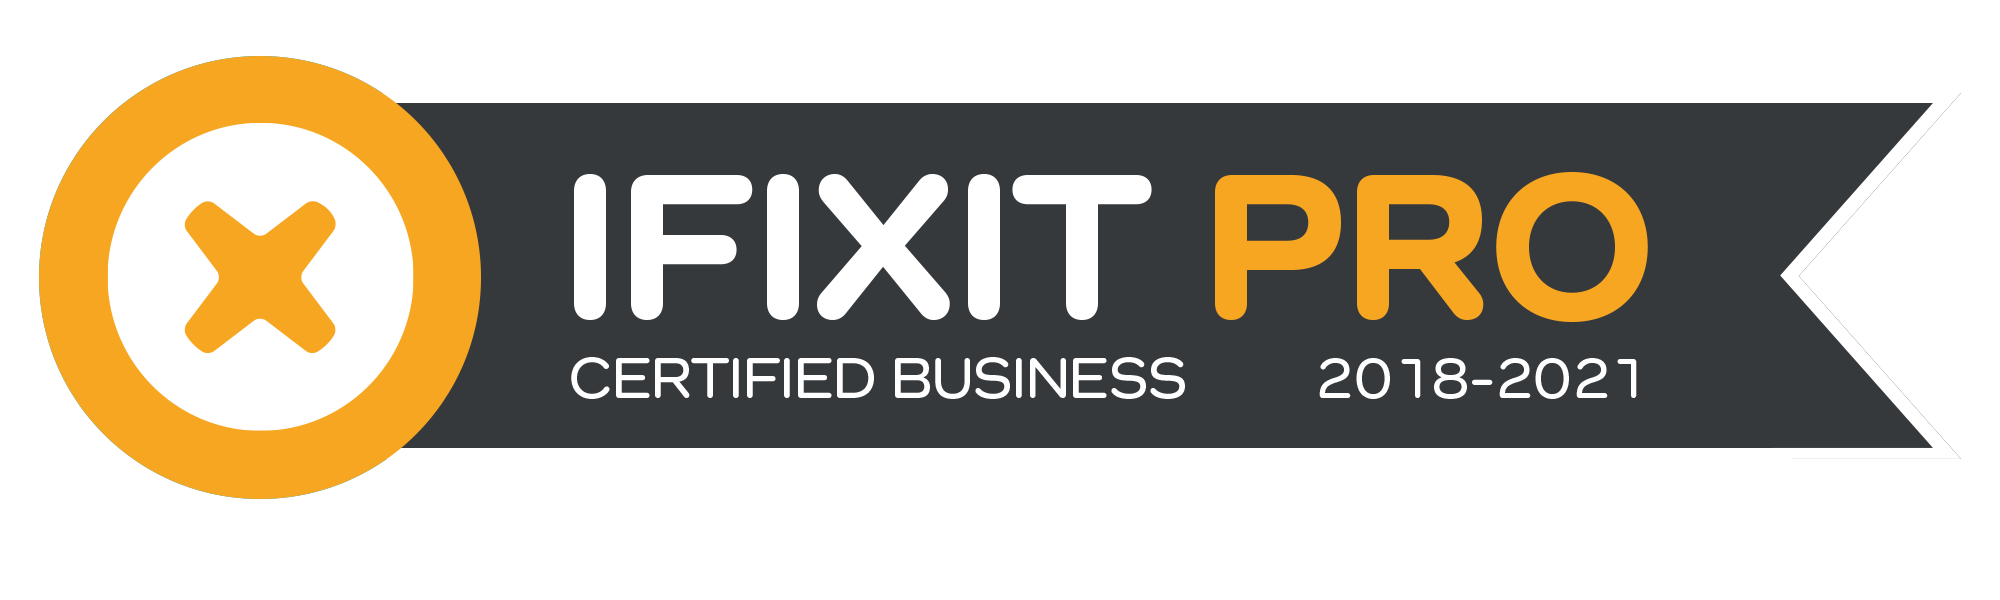 iFixIt Pro Certified Business Computer Repair